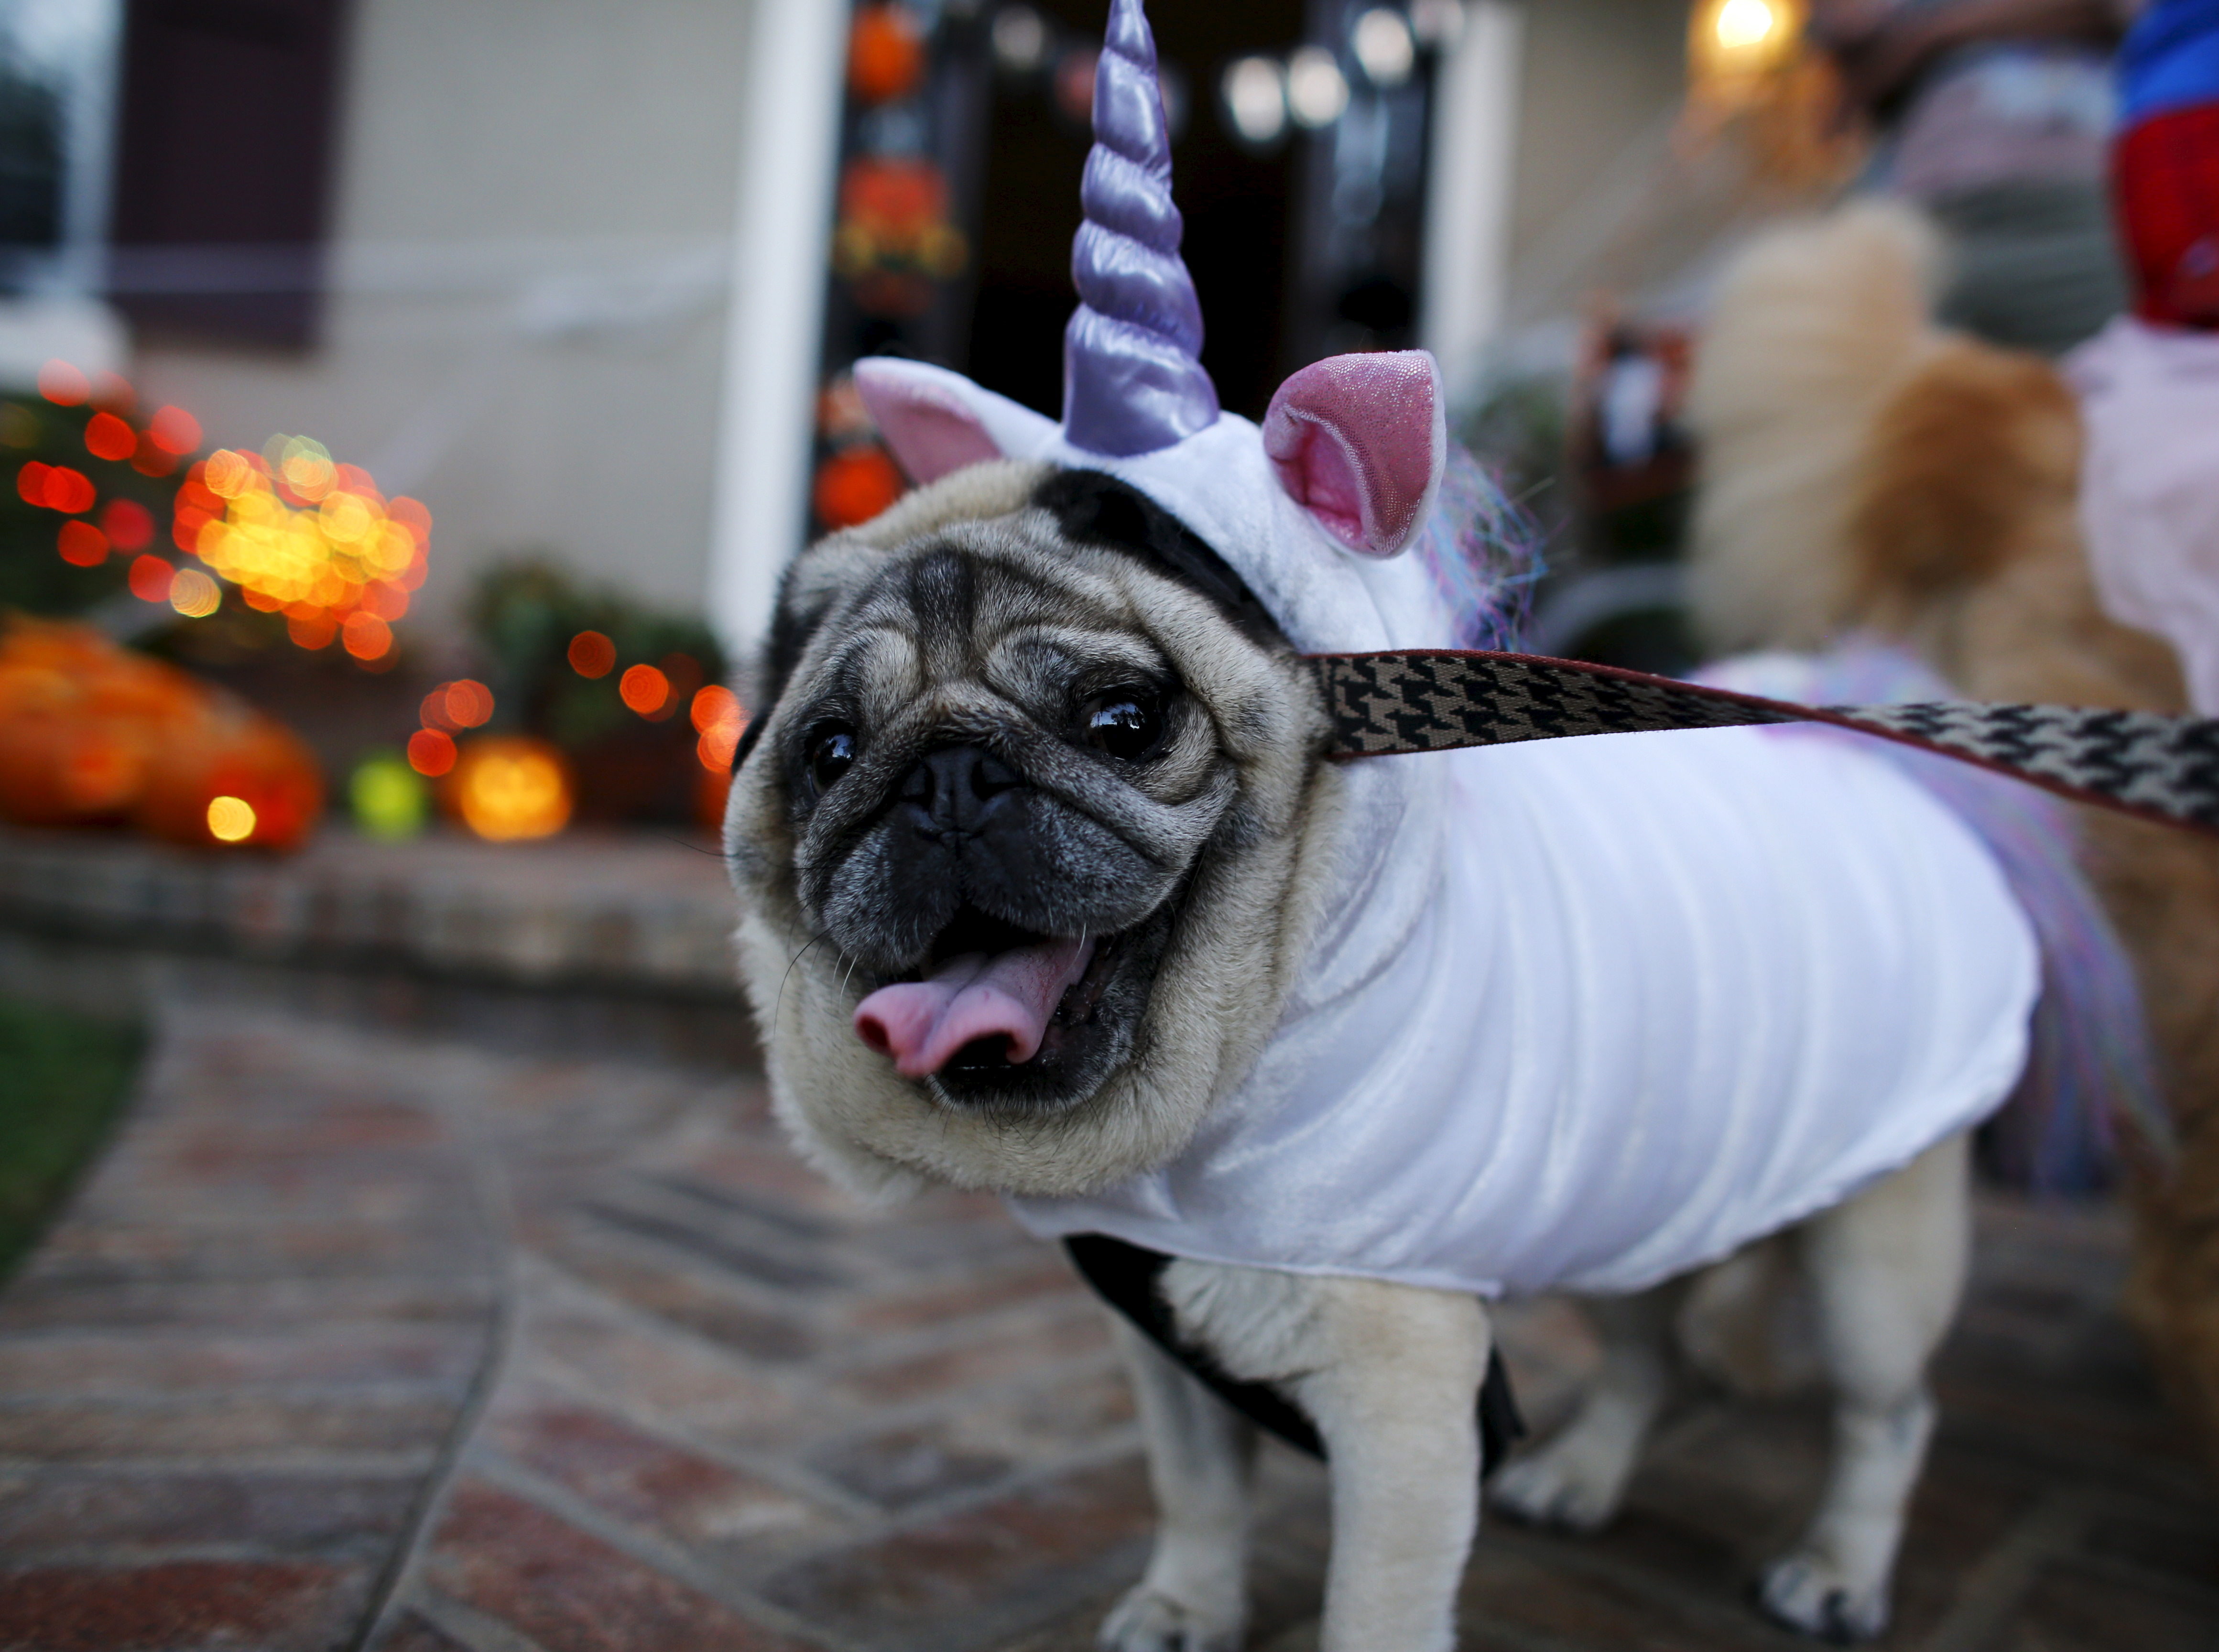 A pug dog is dressed up in costume as she trick or treats with her owners during Halloween in Encinitas, California, October 31, 2015. REUTERS/Mike Blake